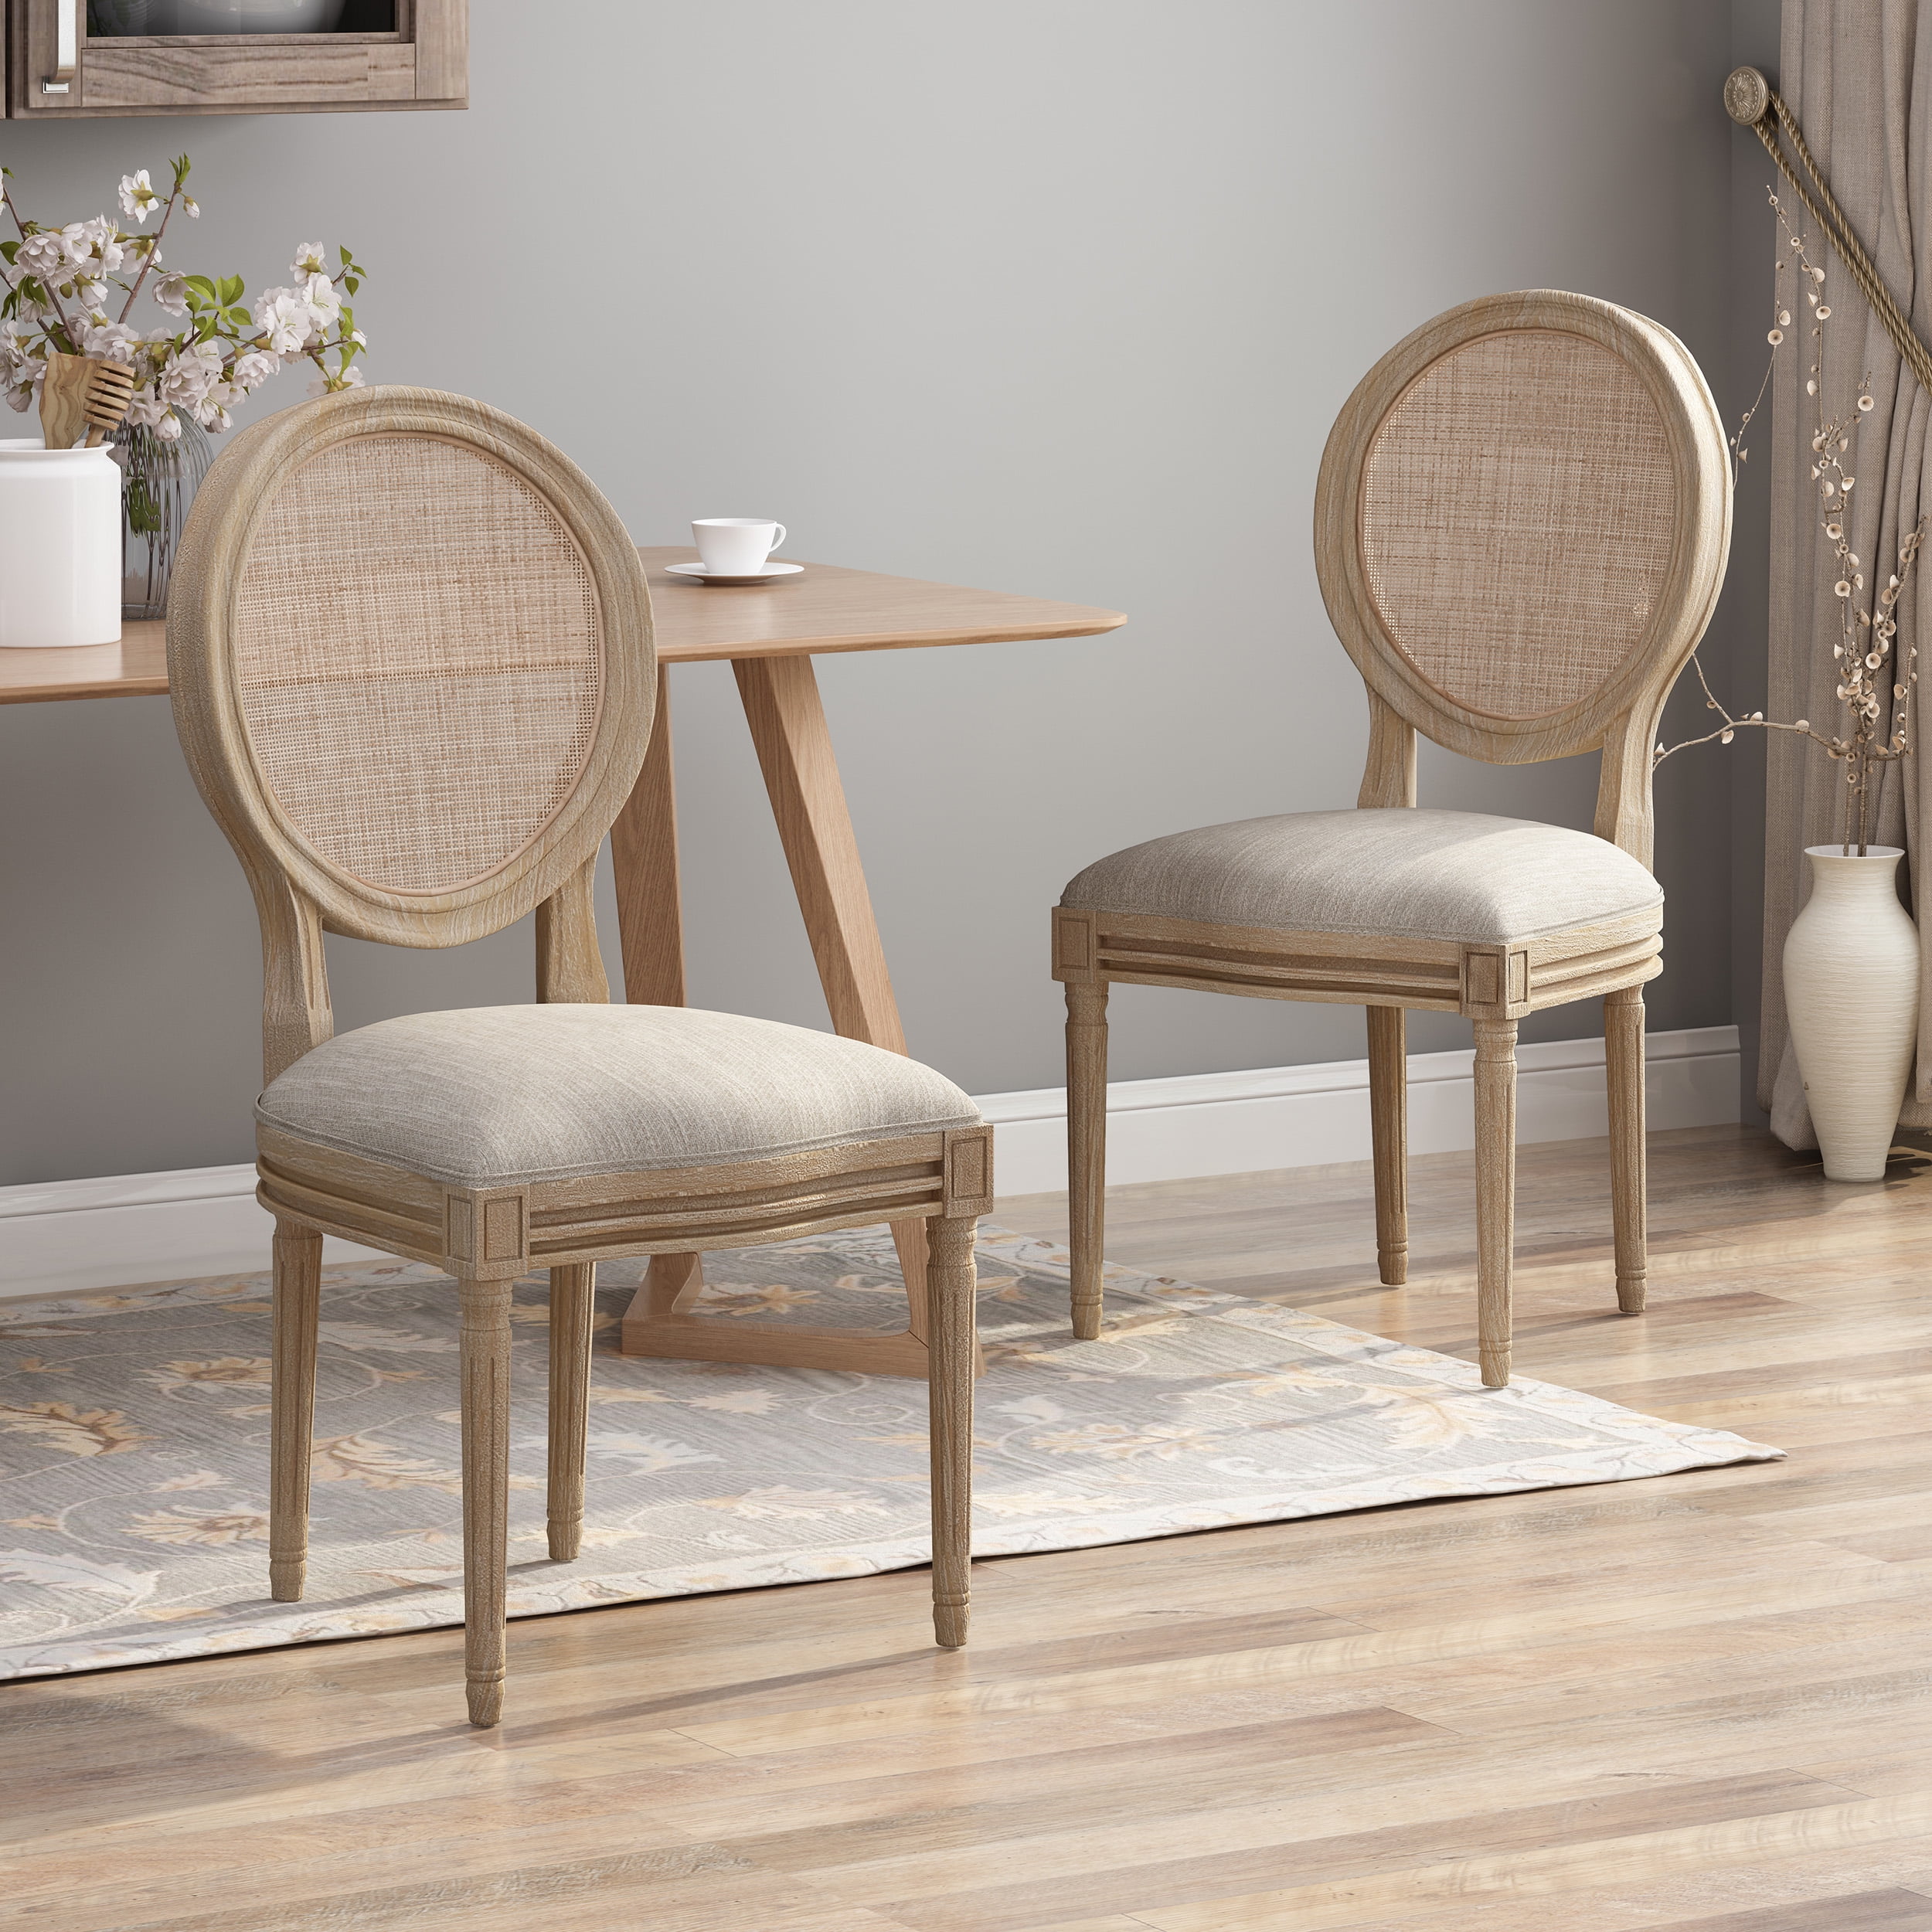 Noble House Ashlyn Wooden Dining Chair with Wicker and Fabric Seating ...